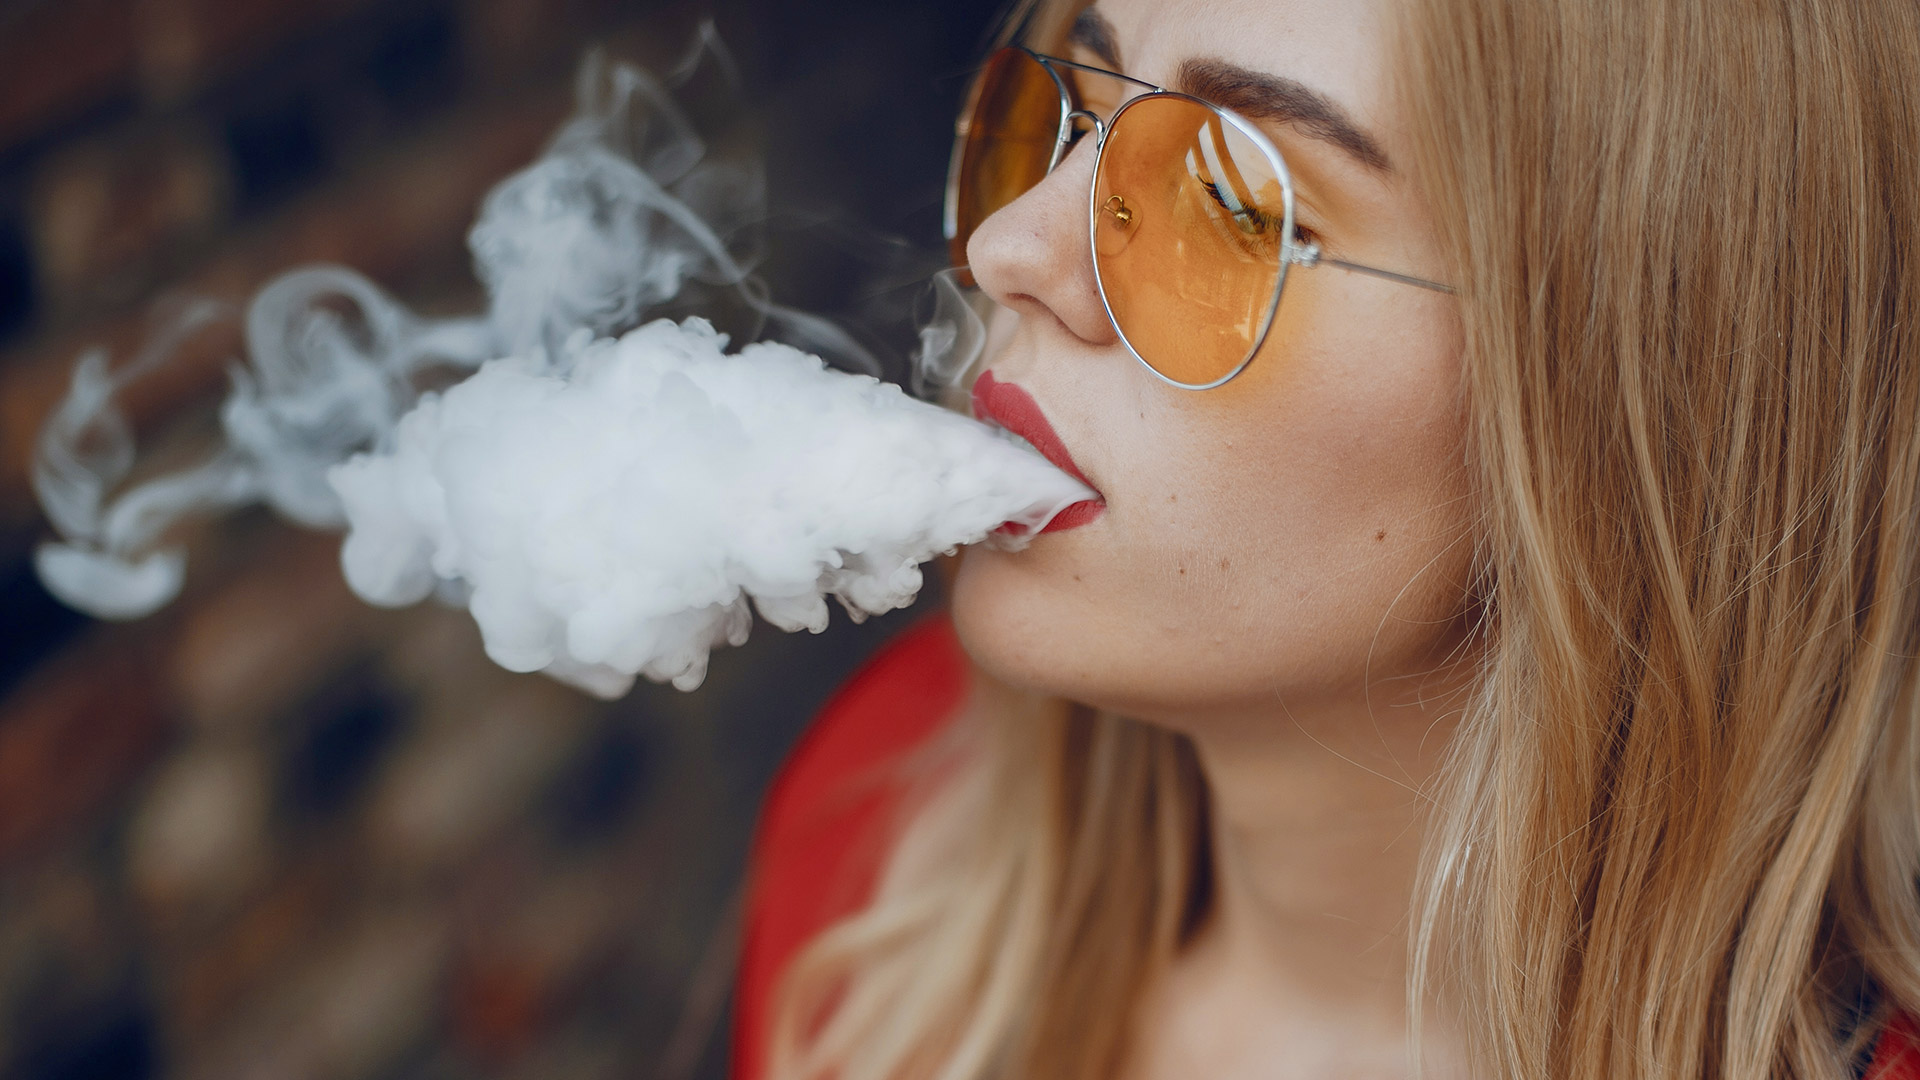 How to Use a Nicotine-Free Vape and Be Completely Satisfied